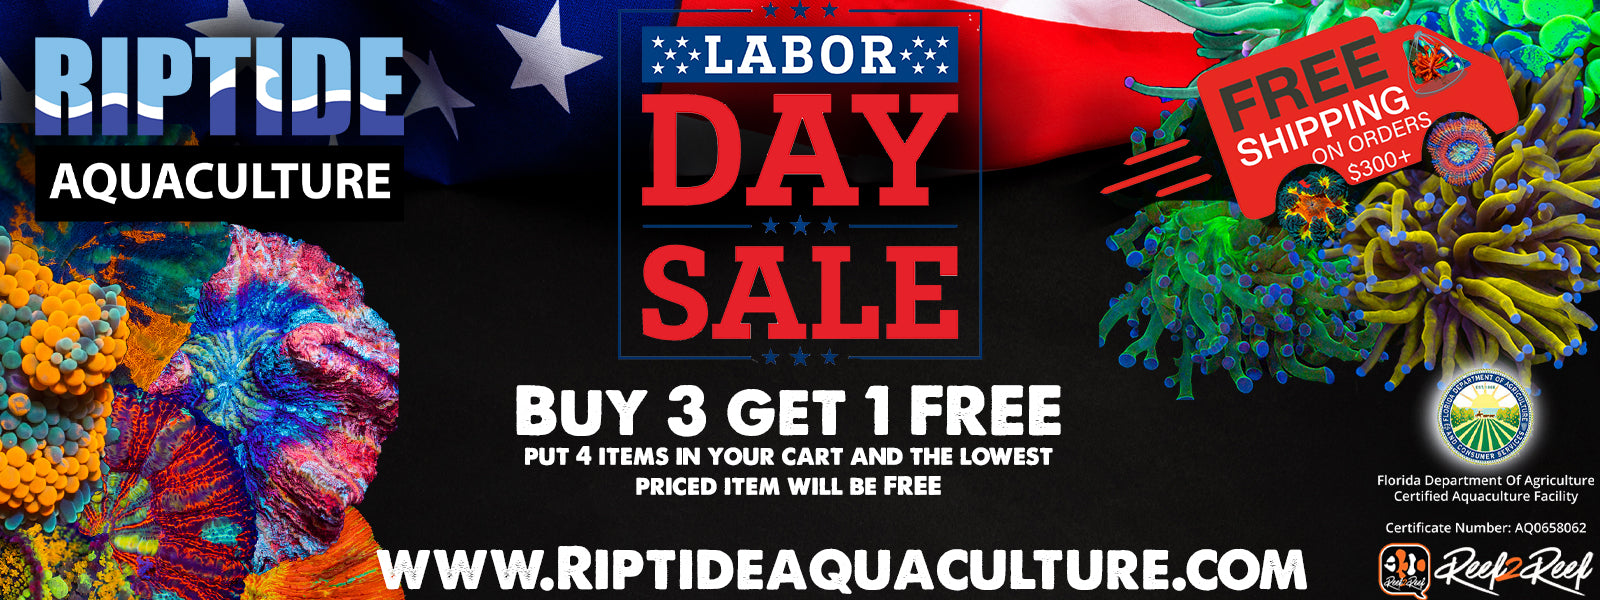 Riptide Aquaculture| Labor Day Bash| Buy 3 Get 1 Free| WE ARE BACK